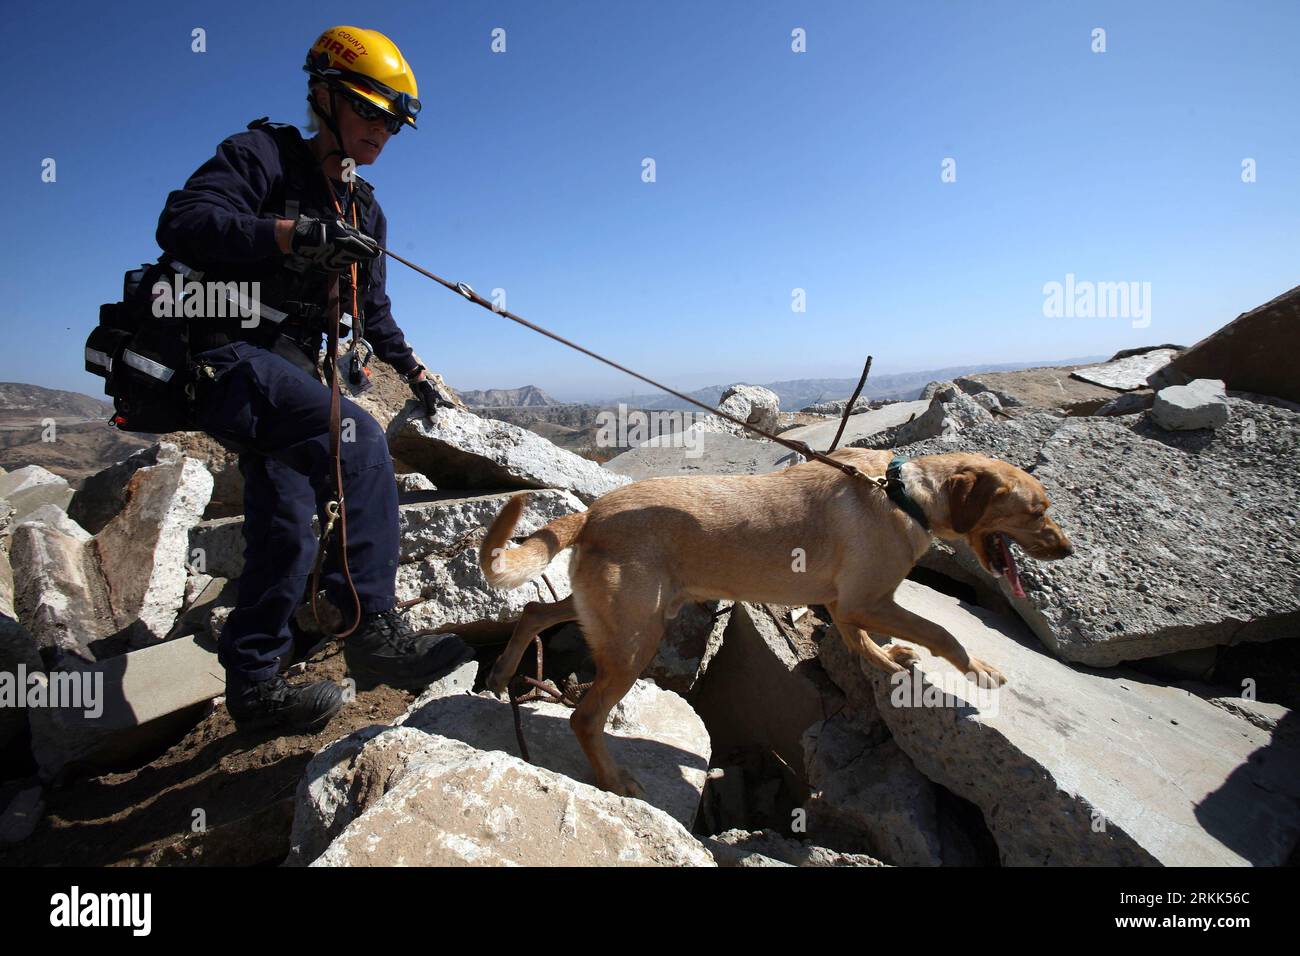 Bildnummer: 56201226  Datum: 20.10.2011  Copyright: imago/Xinhua (111021) -- LOS ANGELES, Oct. 21, 2011 (Xinhua) -- A member of the Los Angeles County Fire Department and her dog search for survivors in the ruins of a collaged structure during a simulation cases of earthquake emergency as part of an earthquake drill in Northridge, California, Oct. 20, 2011. According to the organizers, for the fourth year in a row, 8.2 million statewide registered to take part in the exercise, surpassing last year s record total 7.9 million participants. (Xinhua/Ringo H.W. Chiu) (dtf) US-LOS ANGELES-EARTHQUAKE Stock Photo